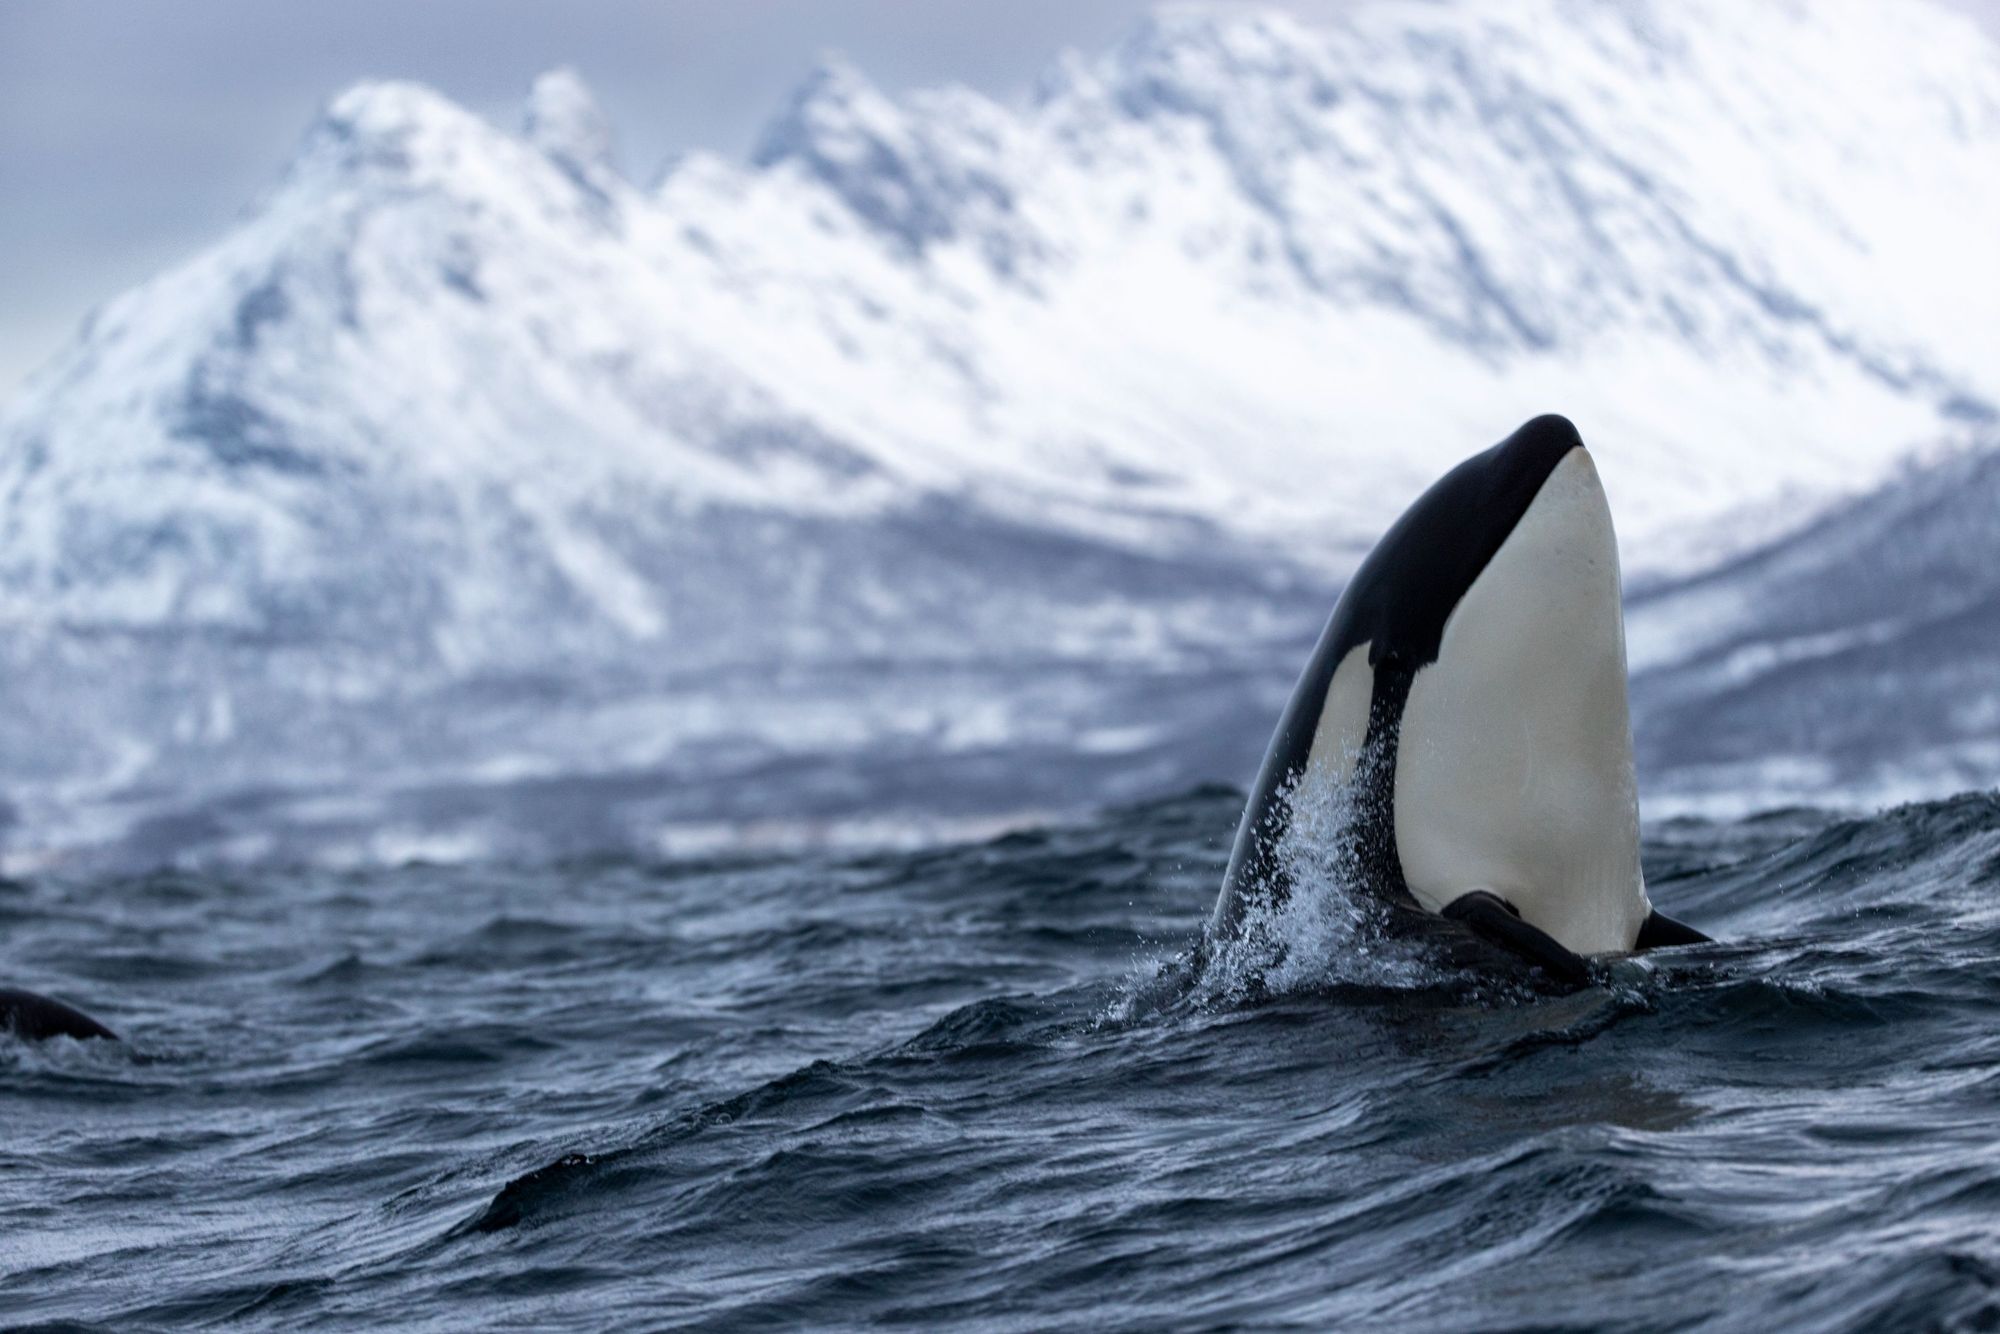 A killer whale surfaces off the coast of Tromsø, Norway. Photo: Getty